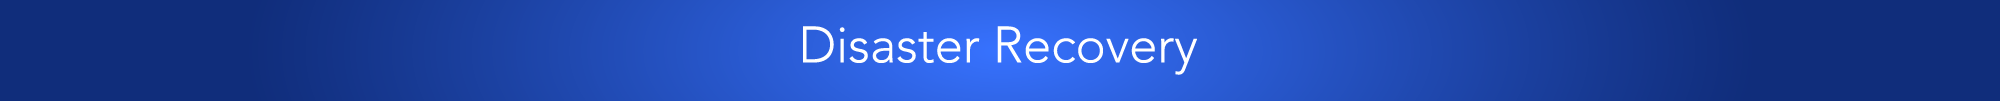 Disaster Recovery blue banner 